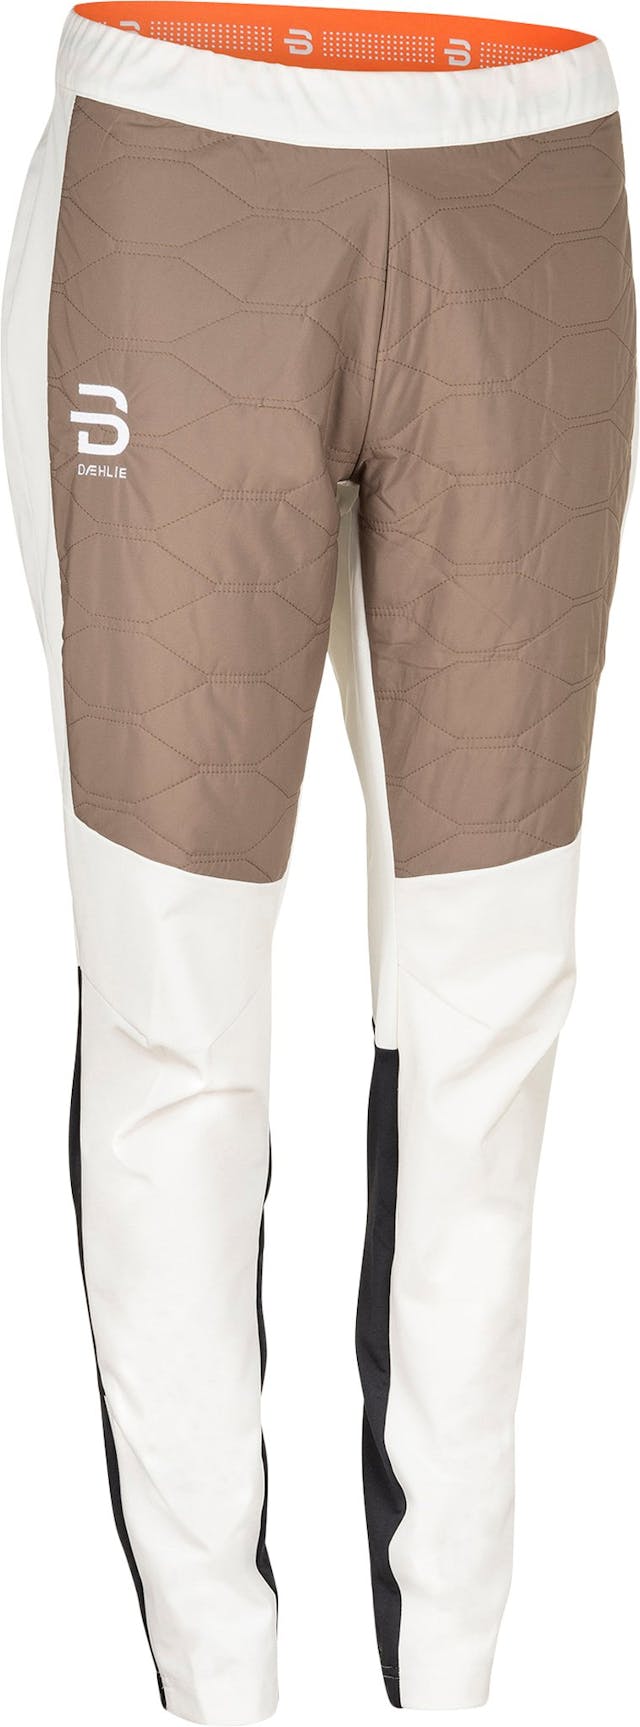 Product image for Challenge Pants - Women's